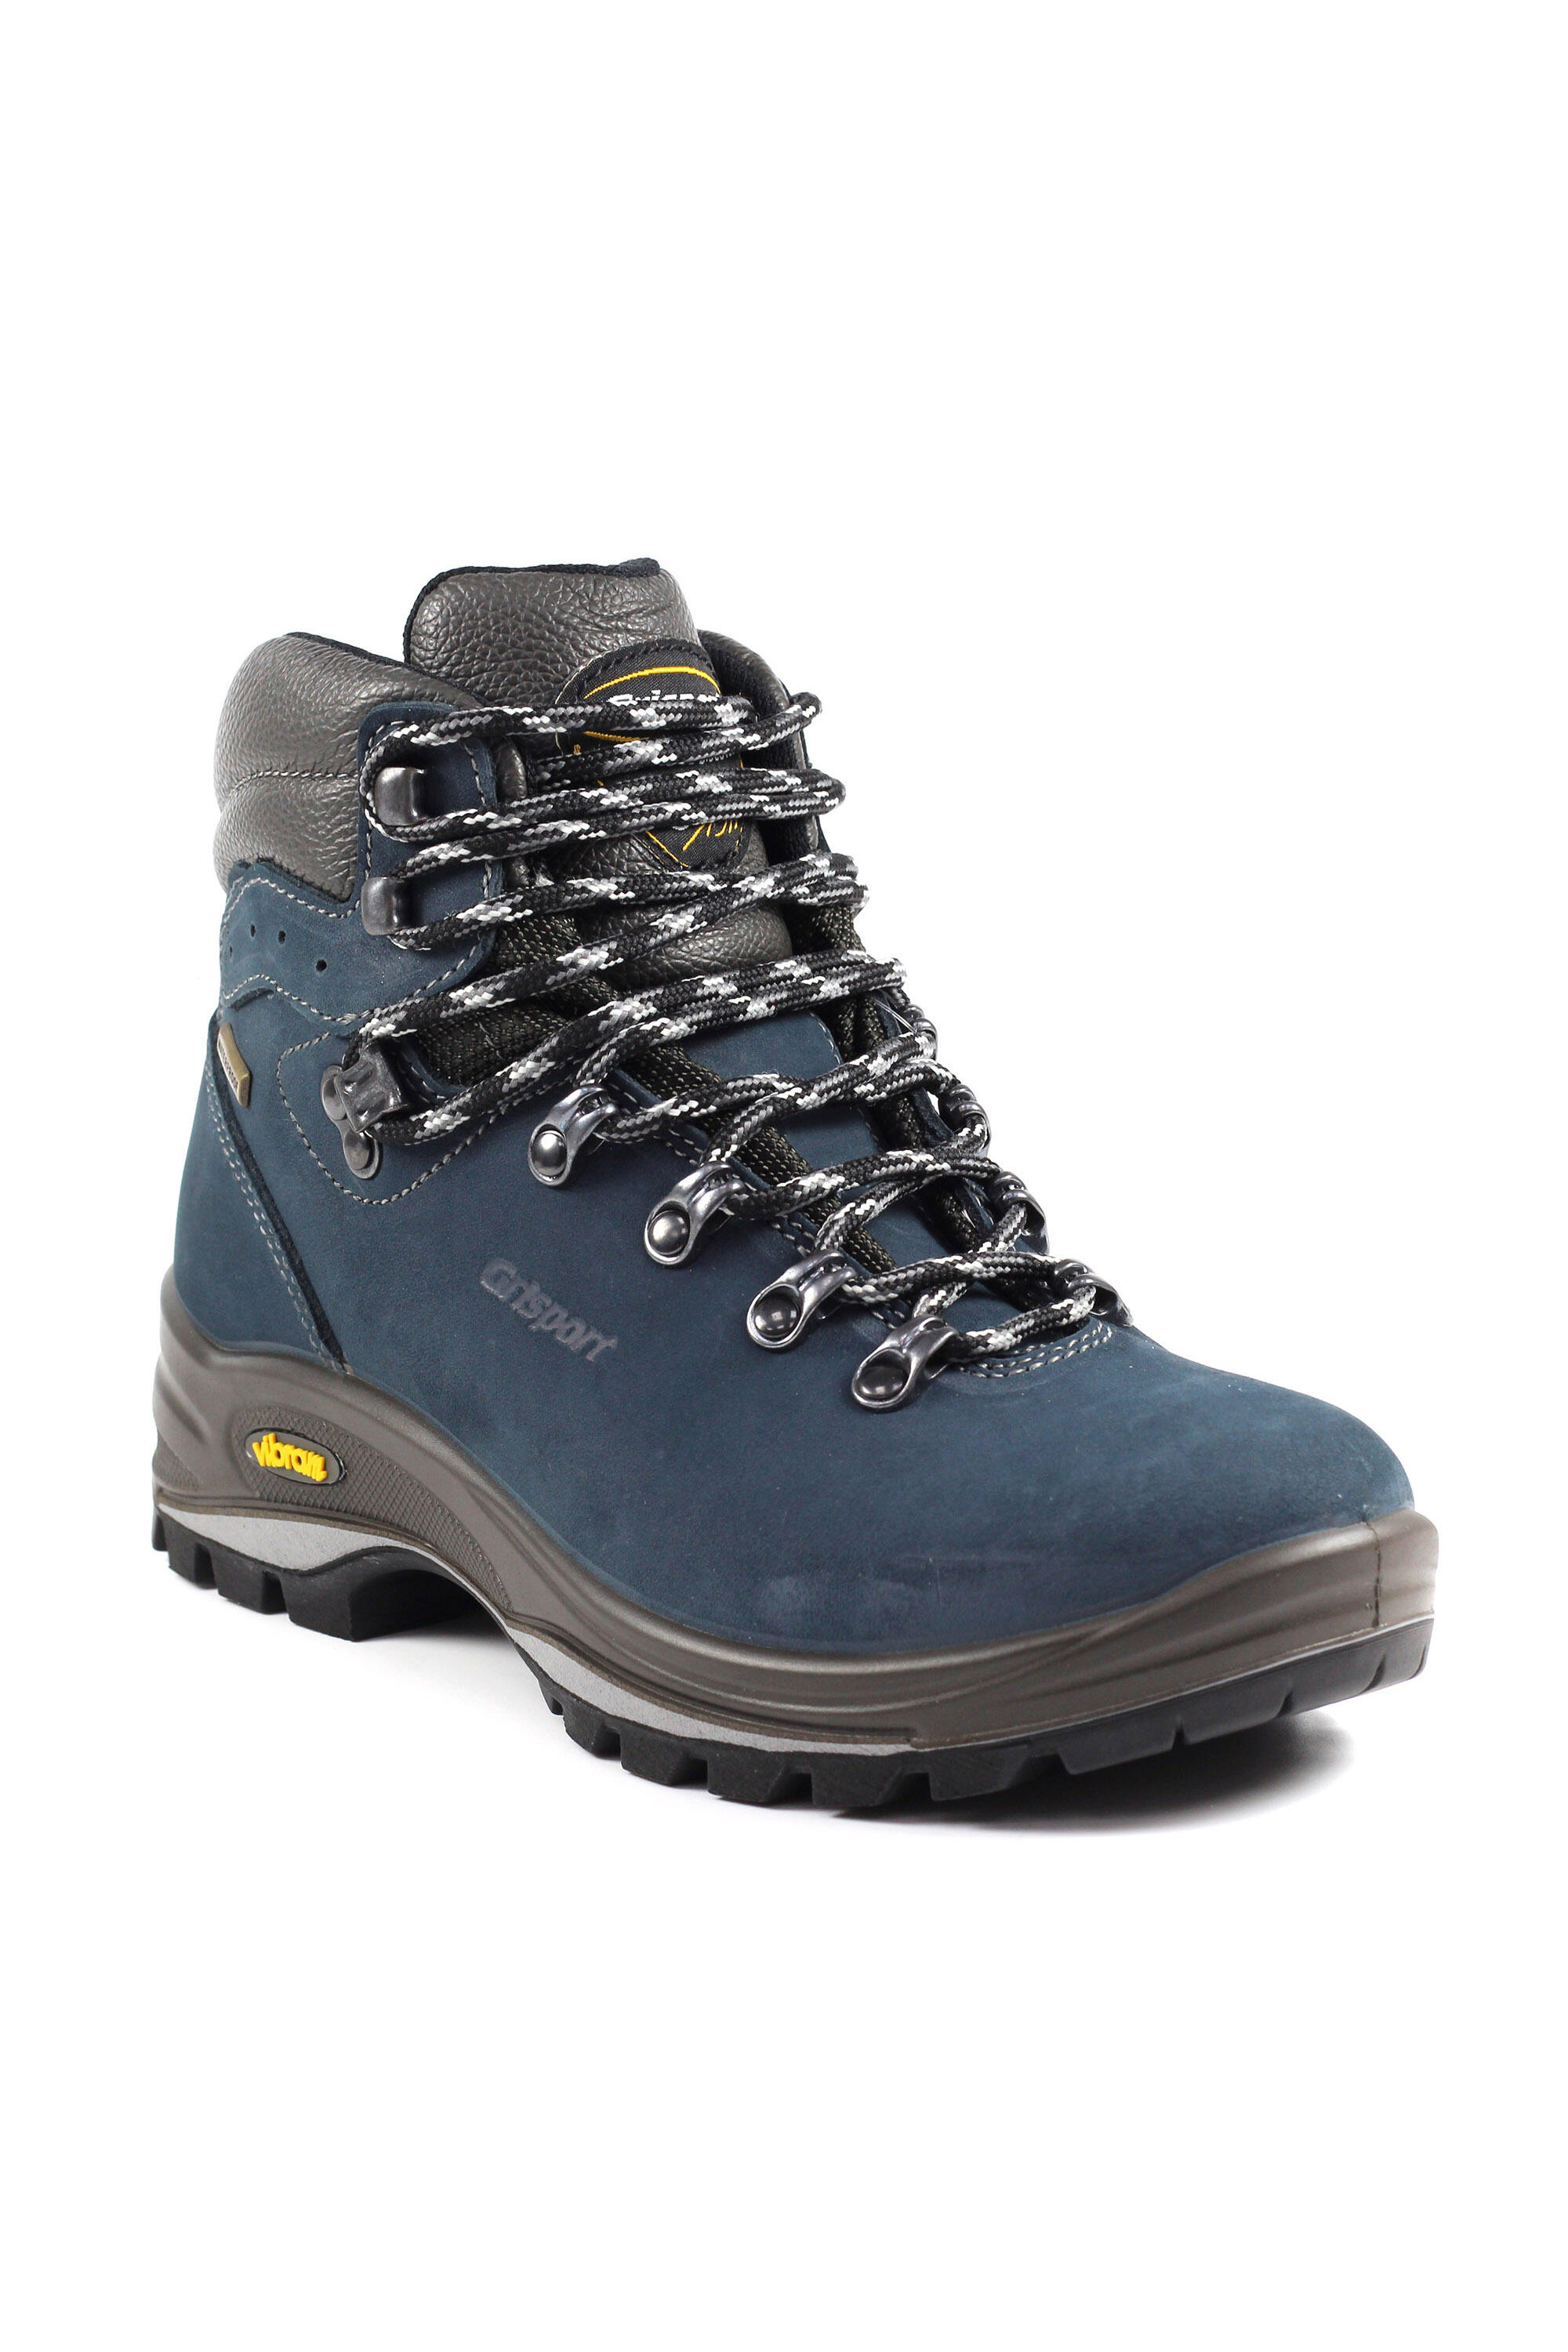 Lady Tempest Blue Waterproof Hiking Boot 1/5